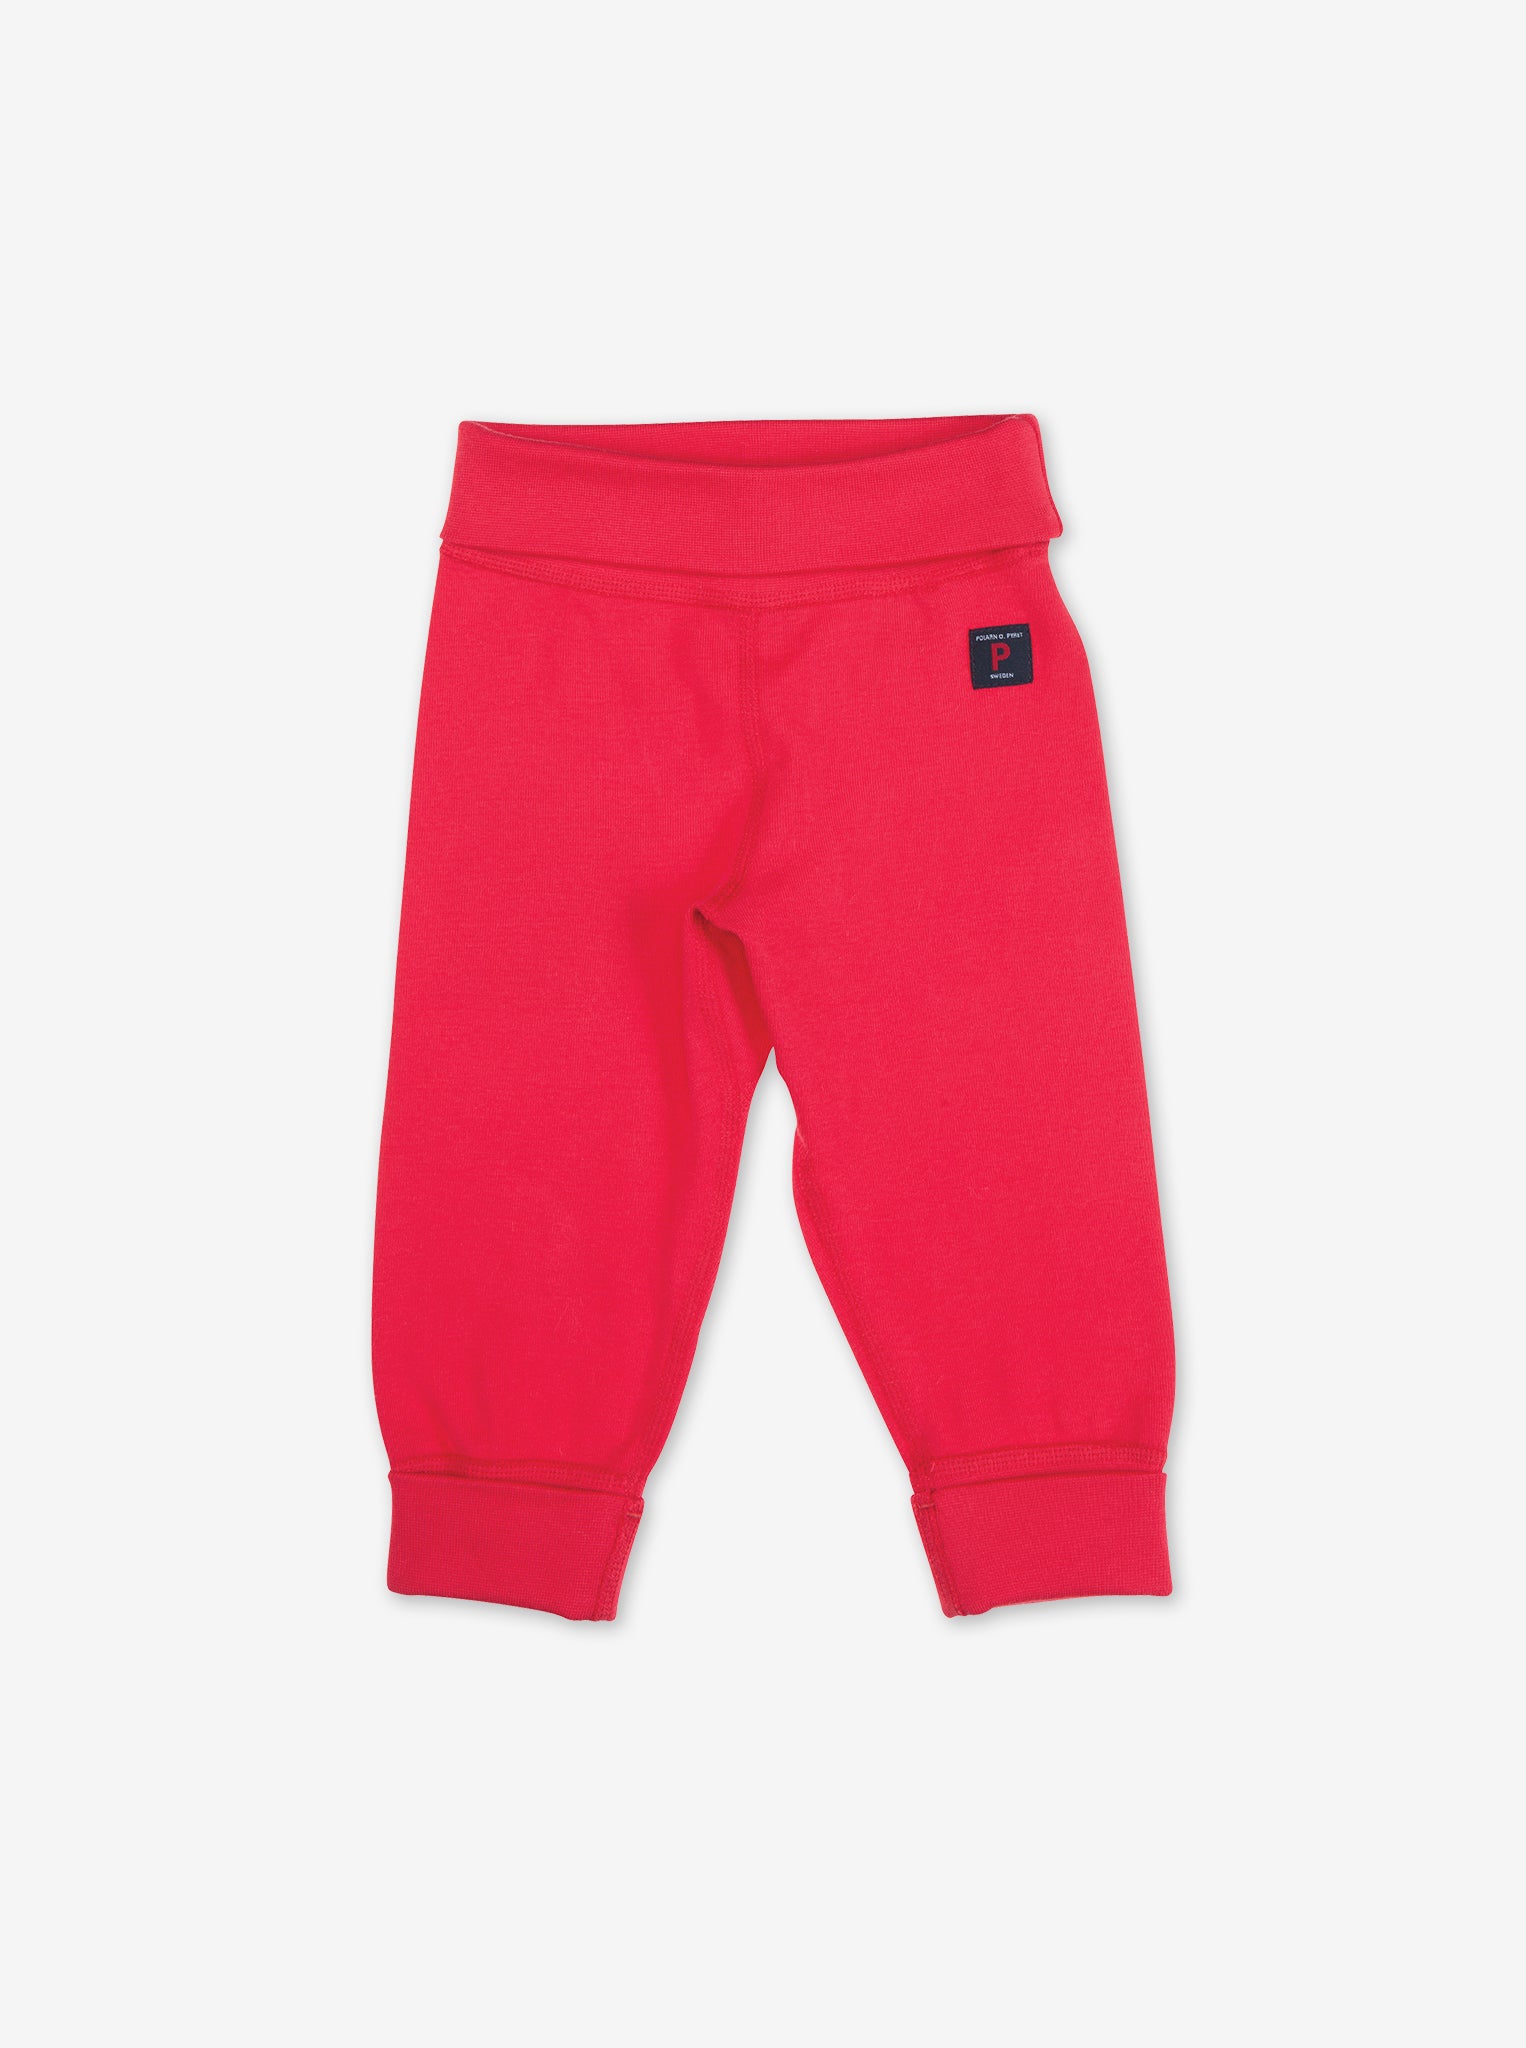 red baby leggings ethical organic cotton, polarn o. pyret quality